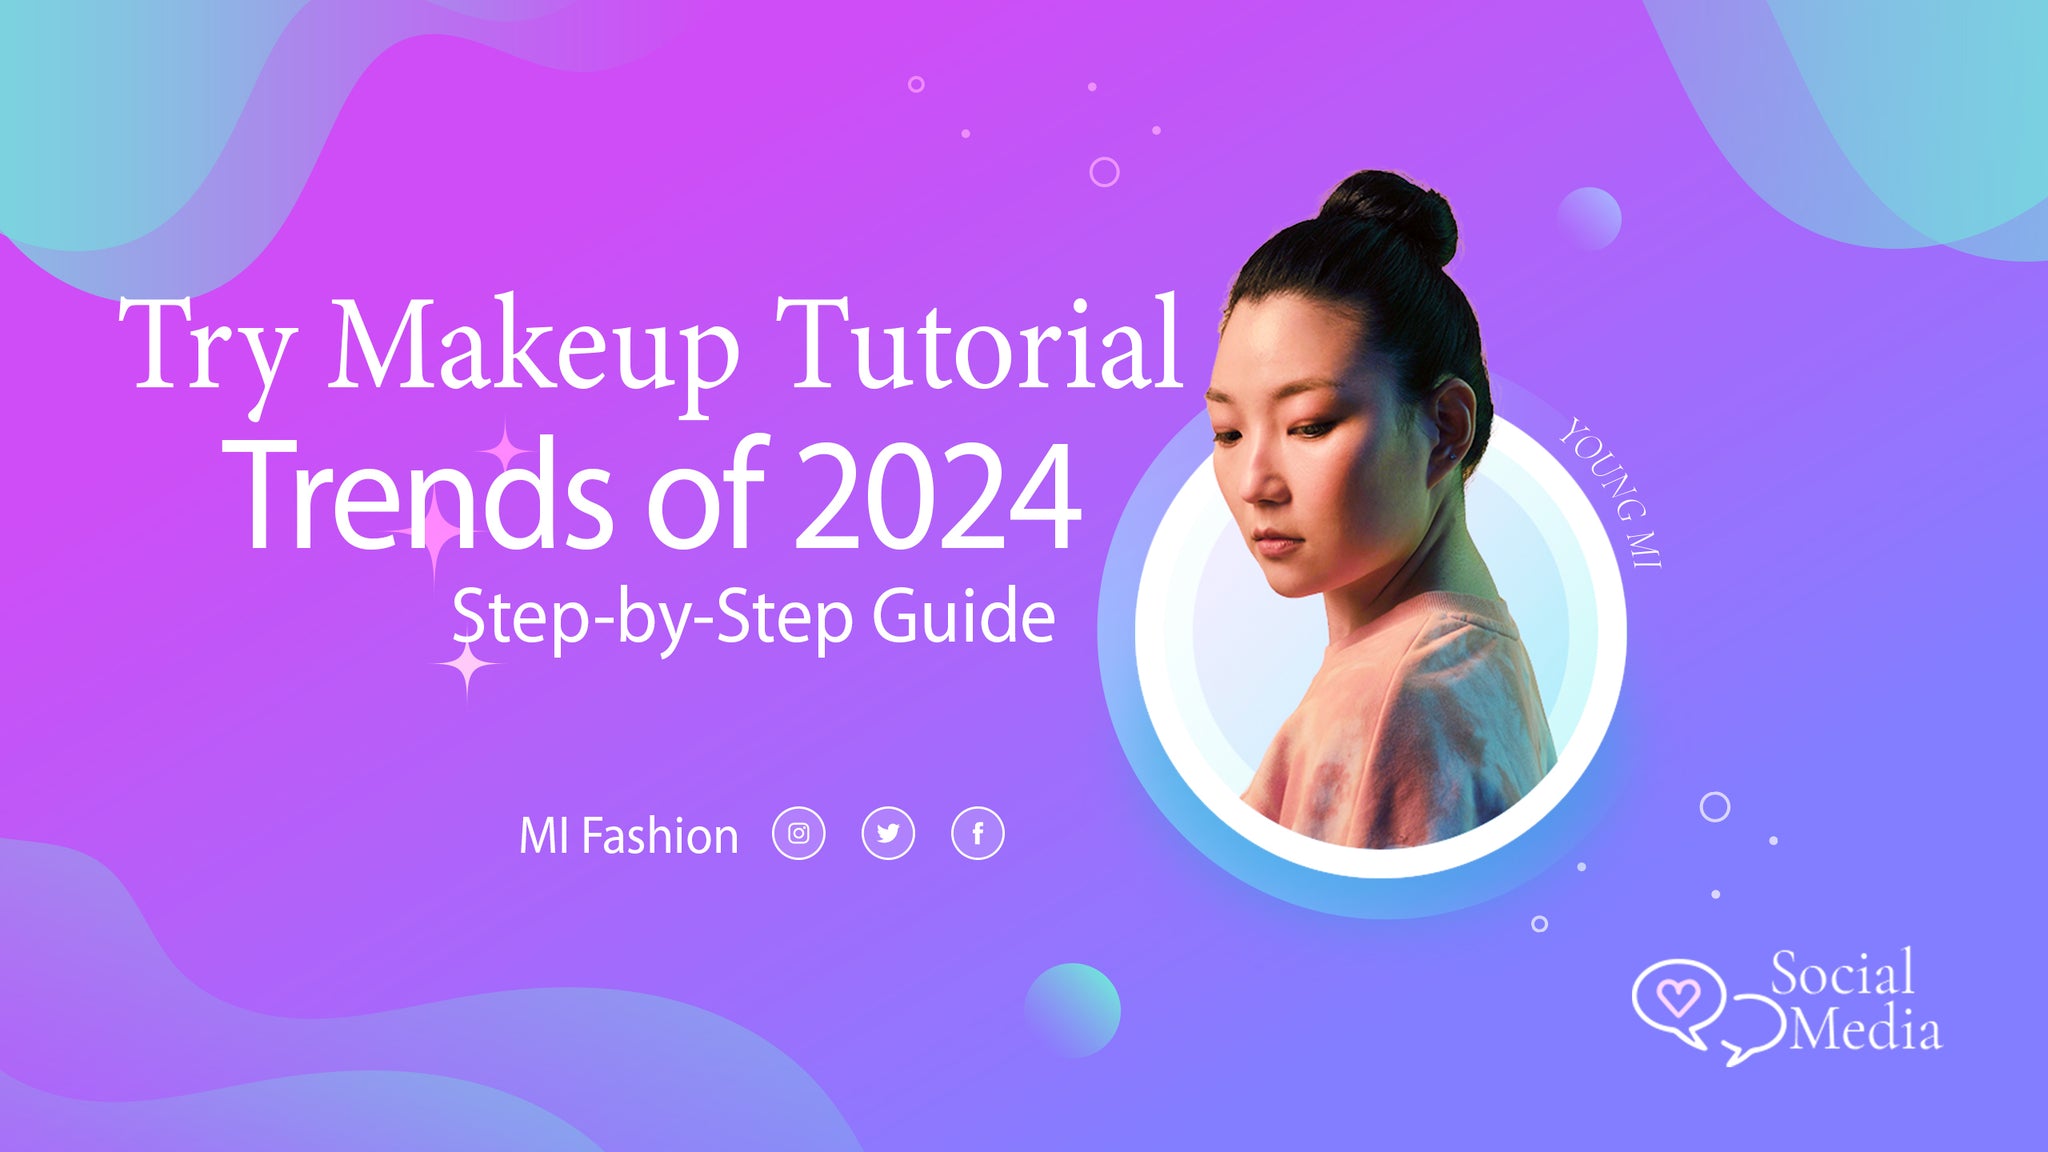 10 Must-Try Makeup Tutorial Trends of 2024: Step-by-Step Guide